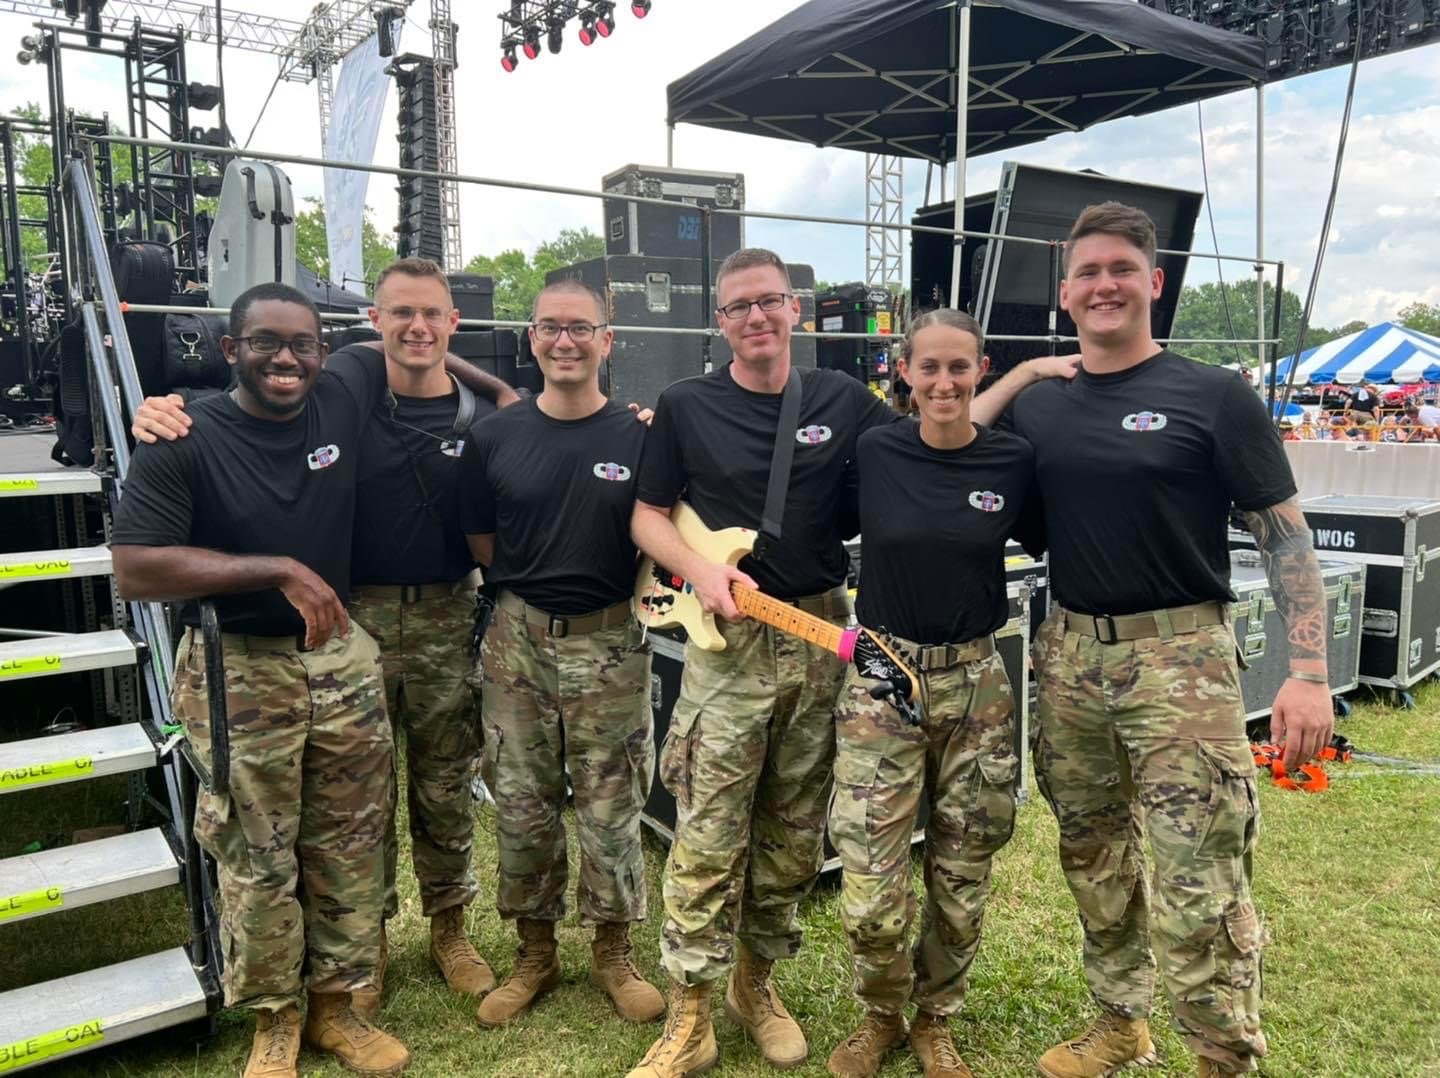 The 82nd Airborne Division Rock Band